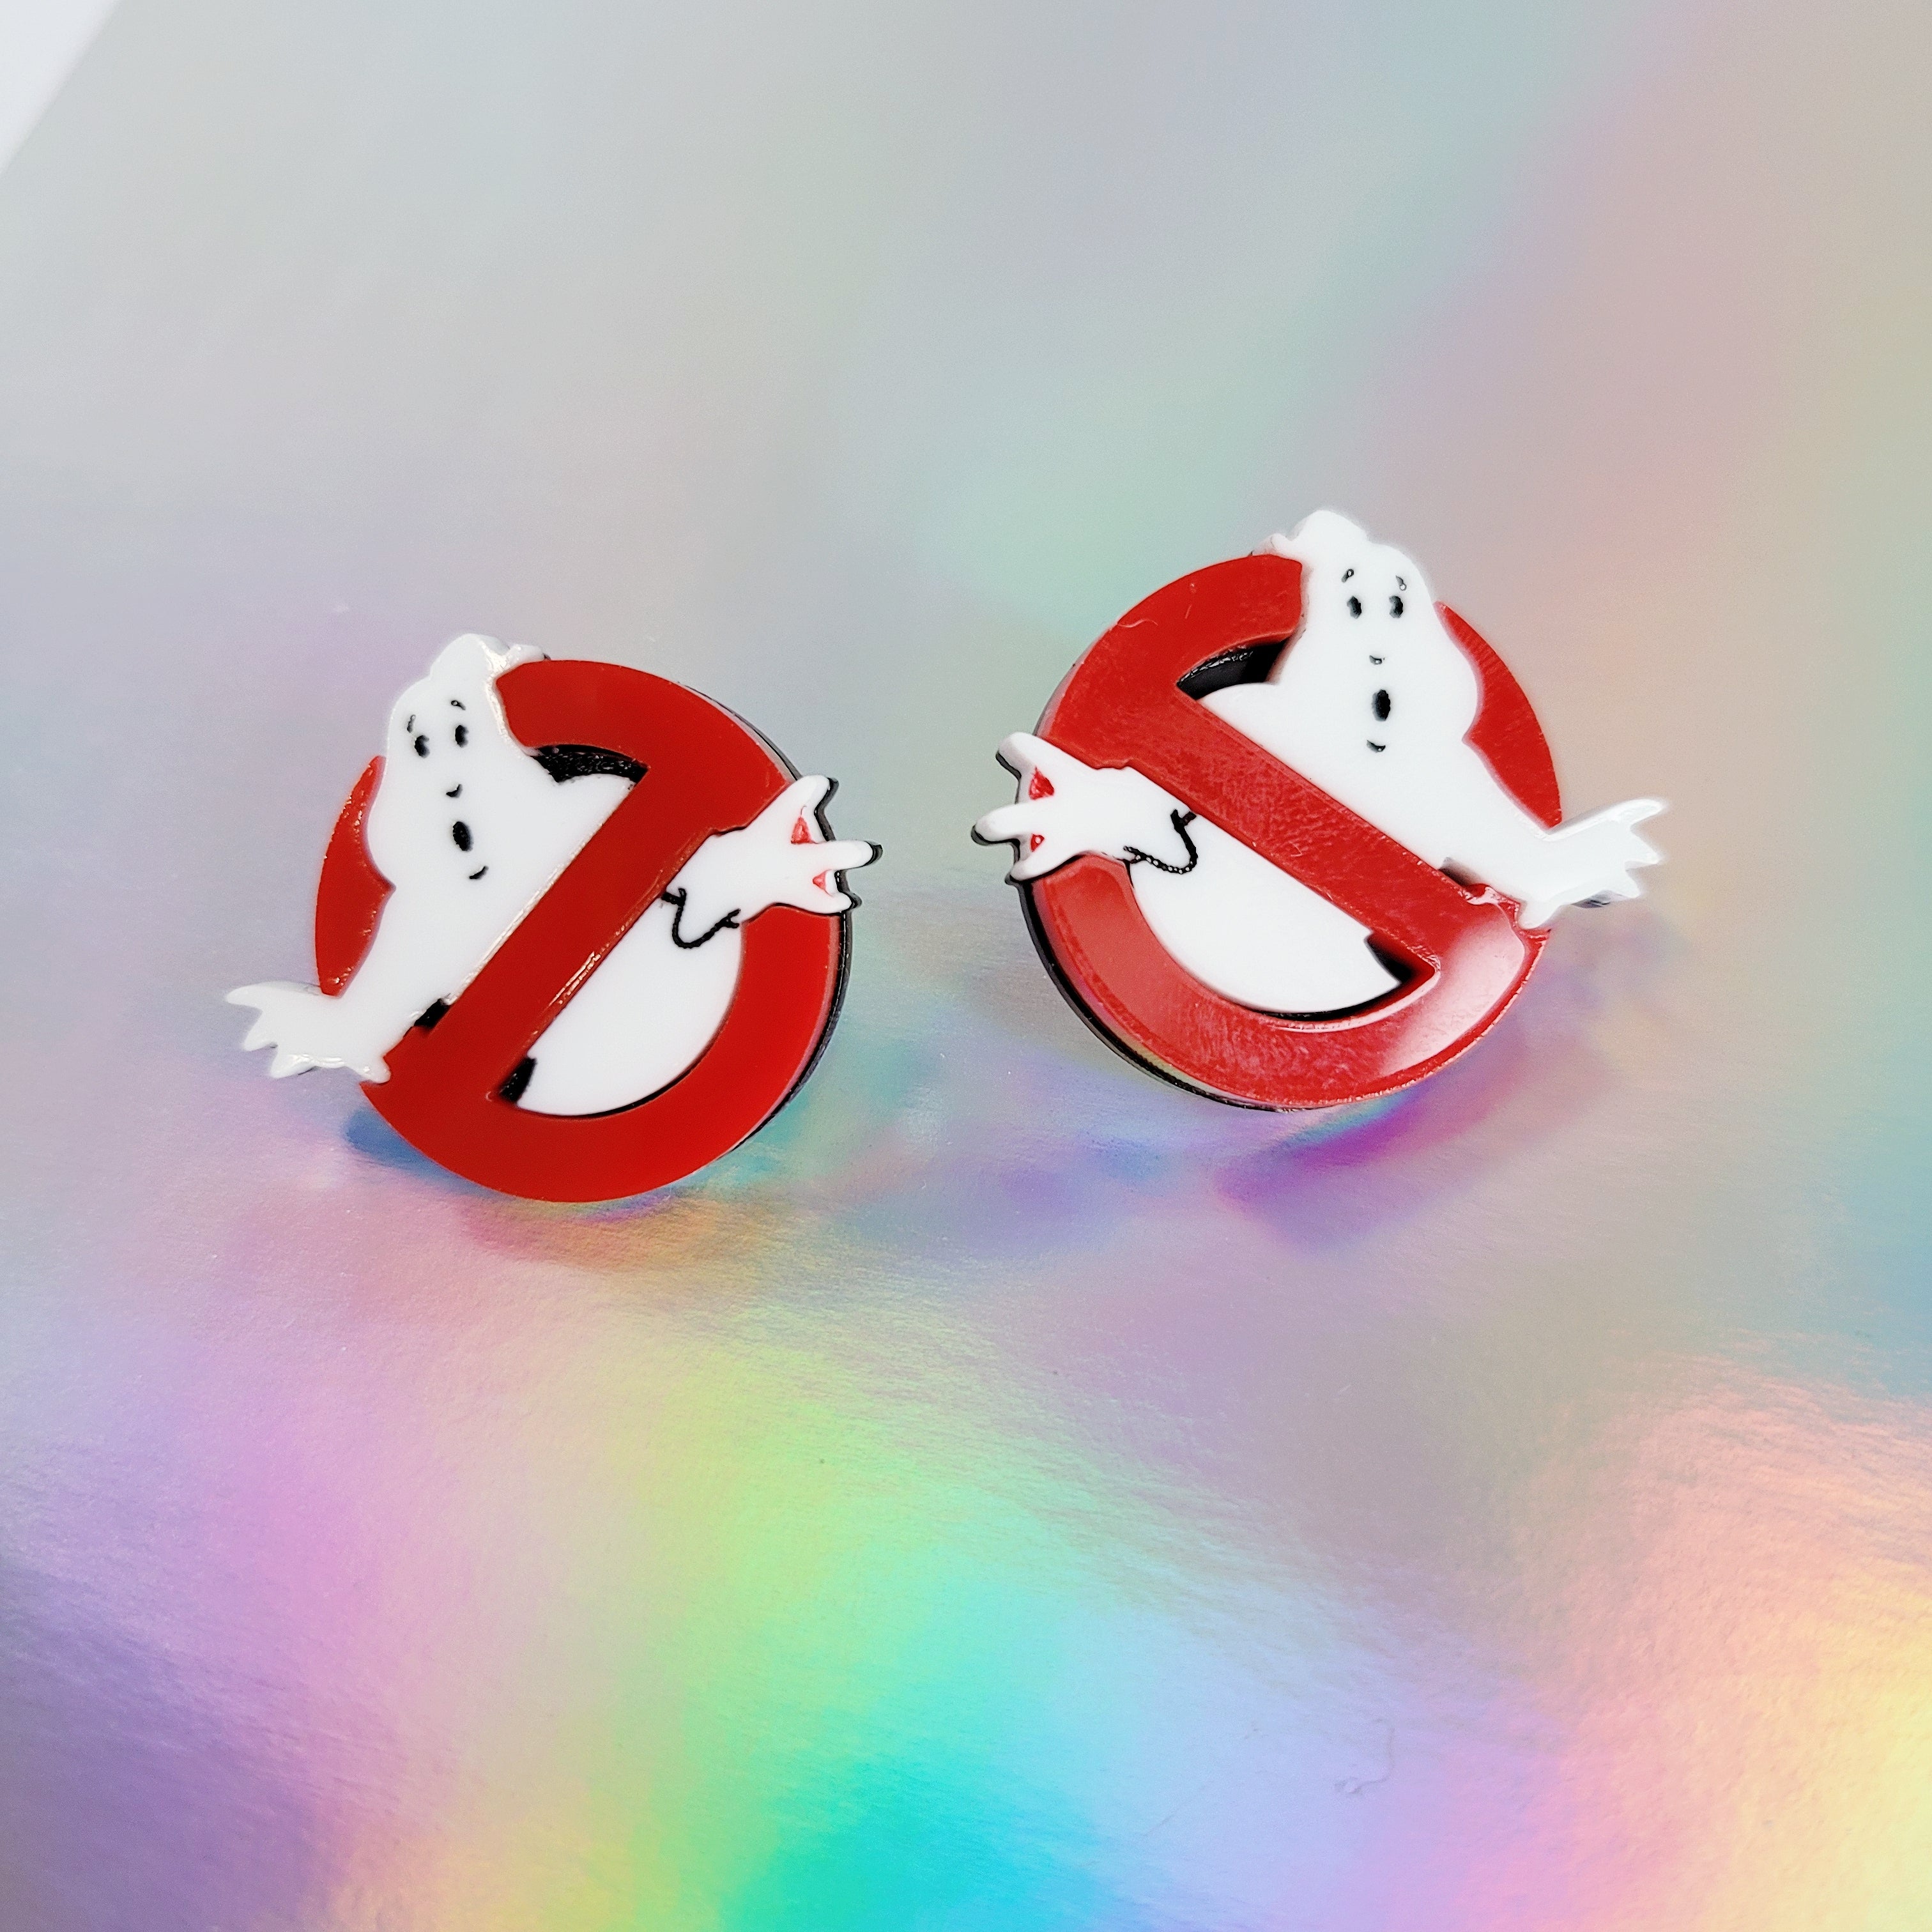 Ghostbusters Link Studs - March 2022